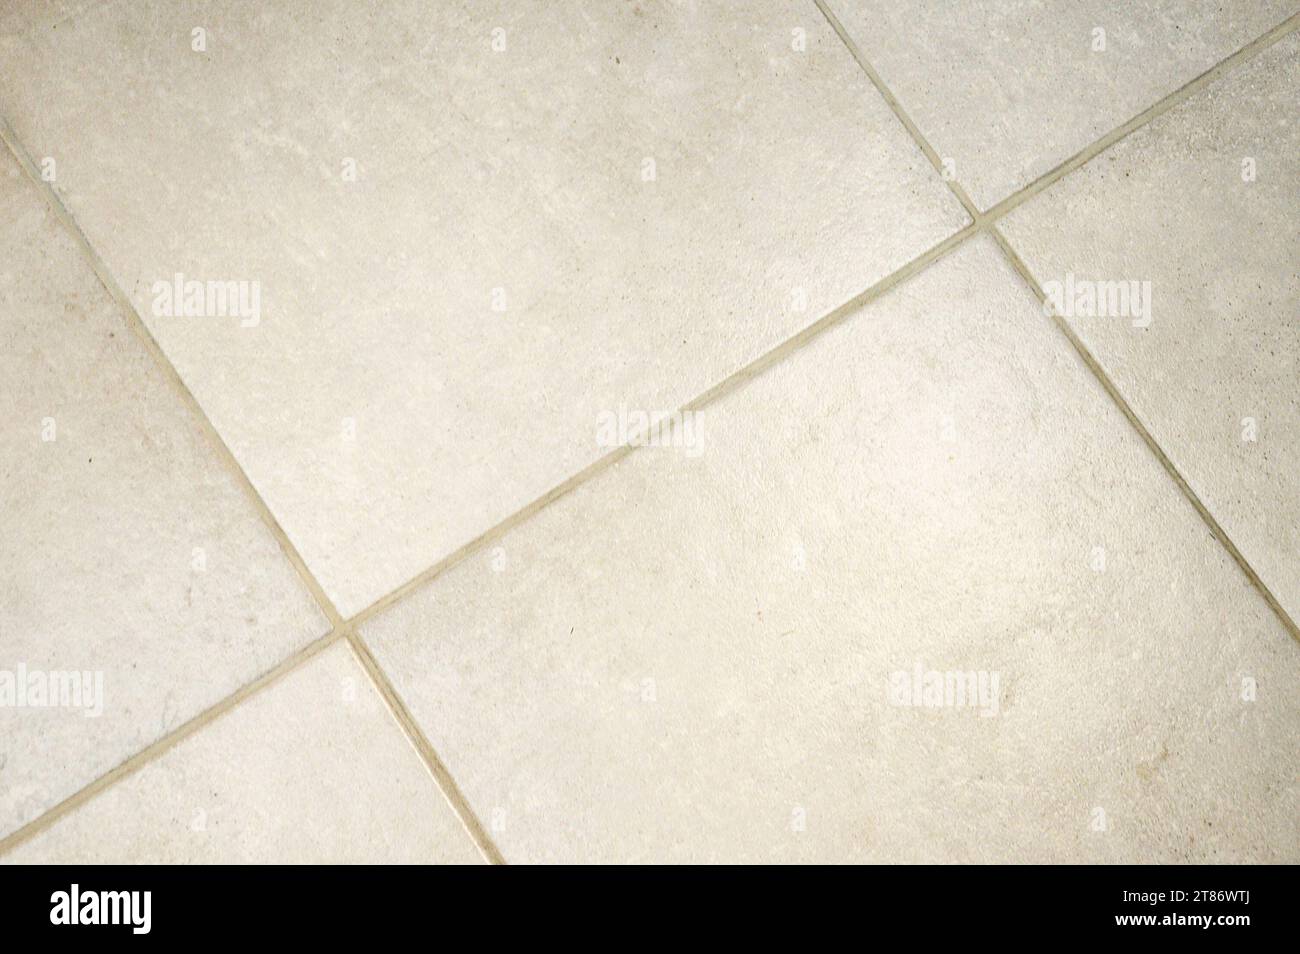 Top view of dirty old tile grouts Stock Photo